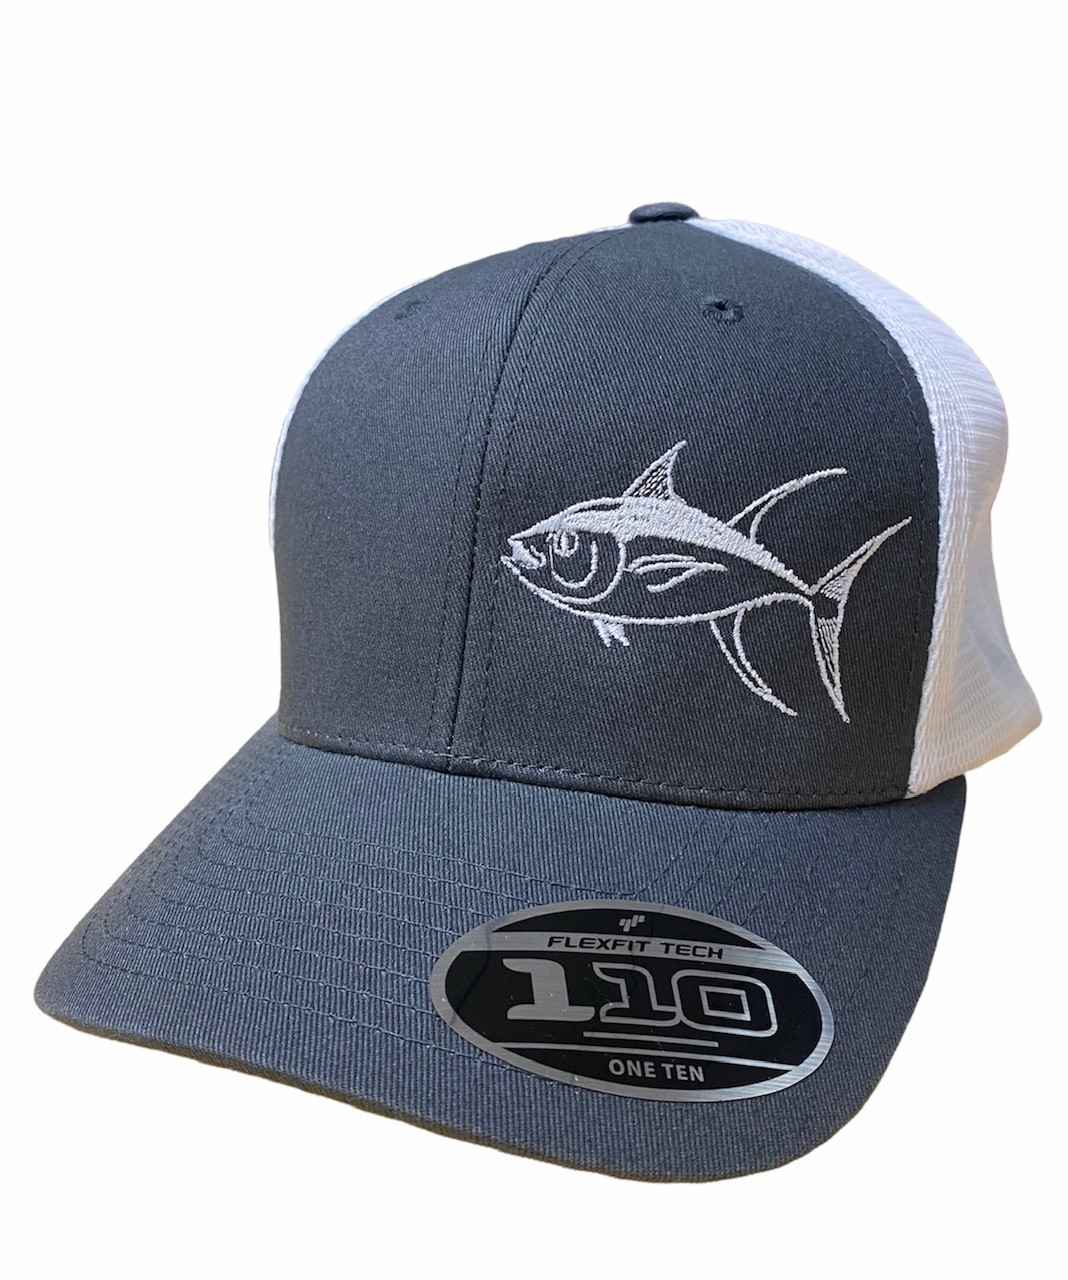 Charcoal grey and White Tuna Mesh with fishing Back adjustable flex band hat